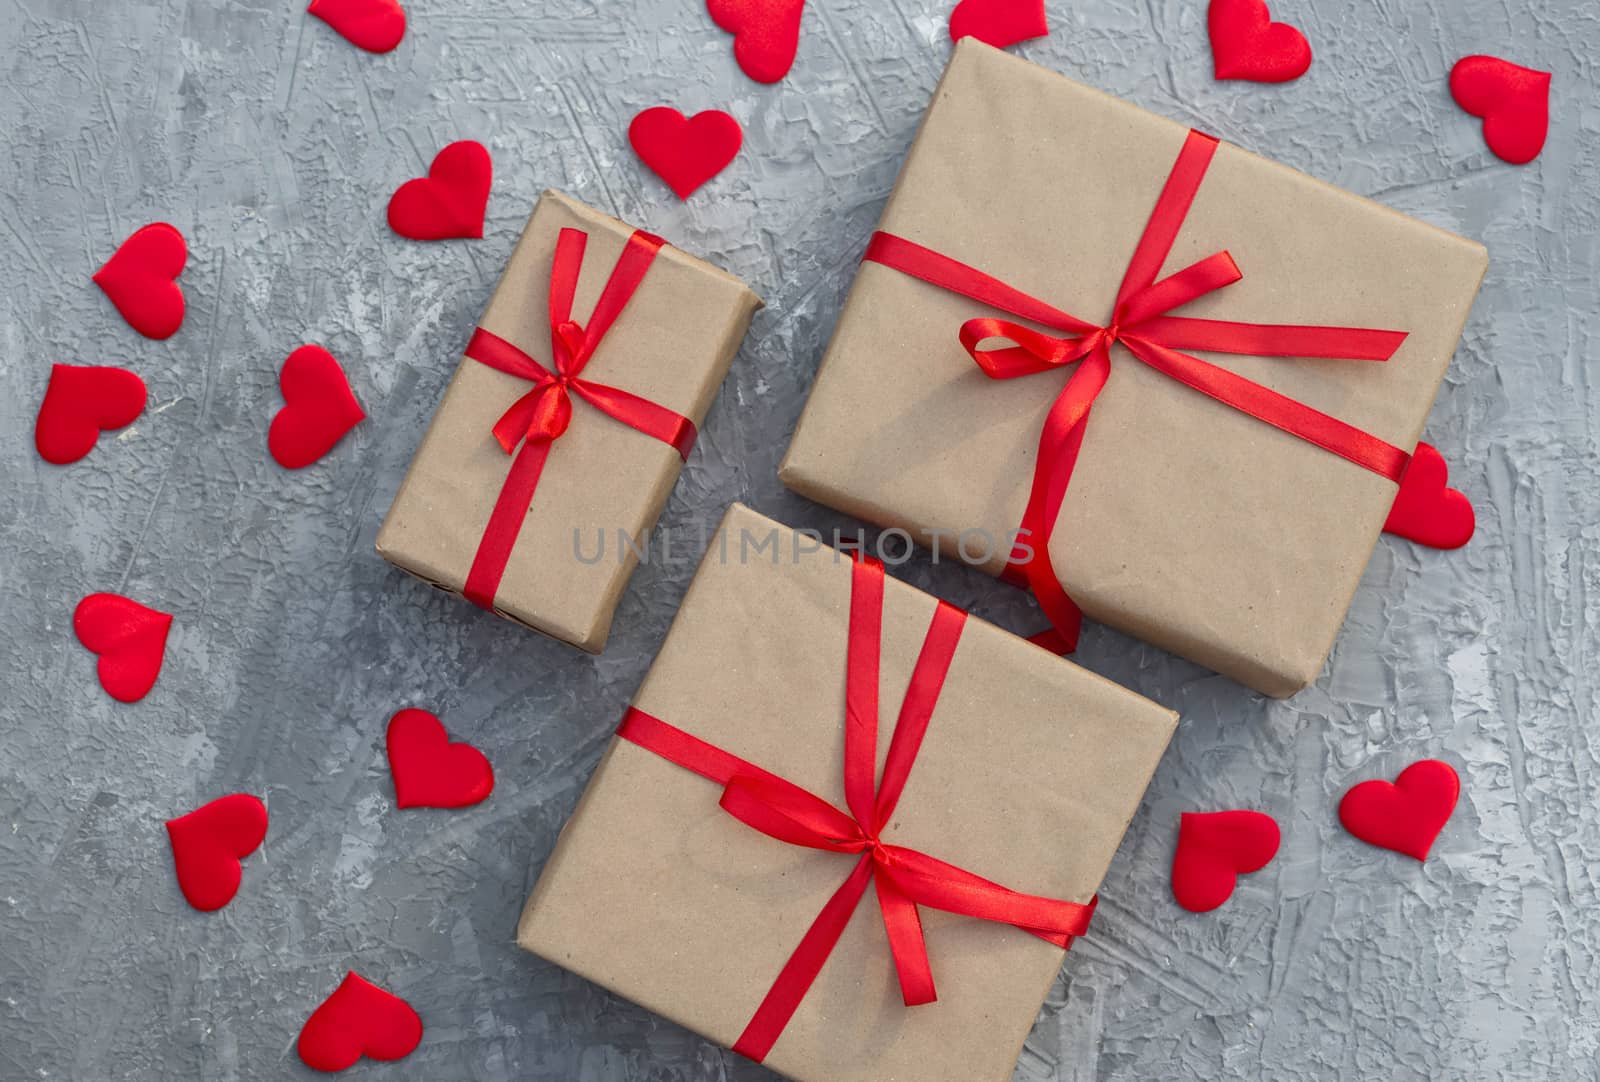 Romantic background with gifts tied with a red ribbon and red hearts on concrete